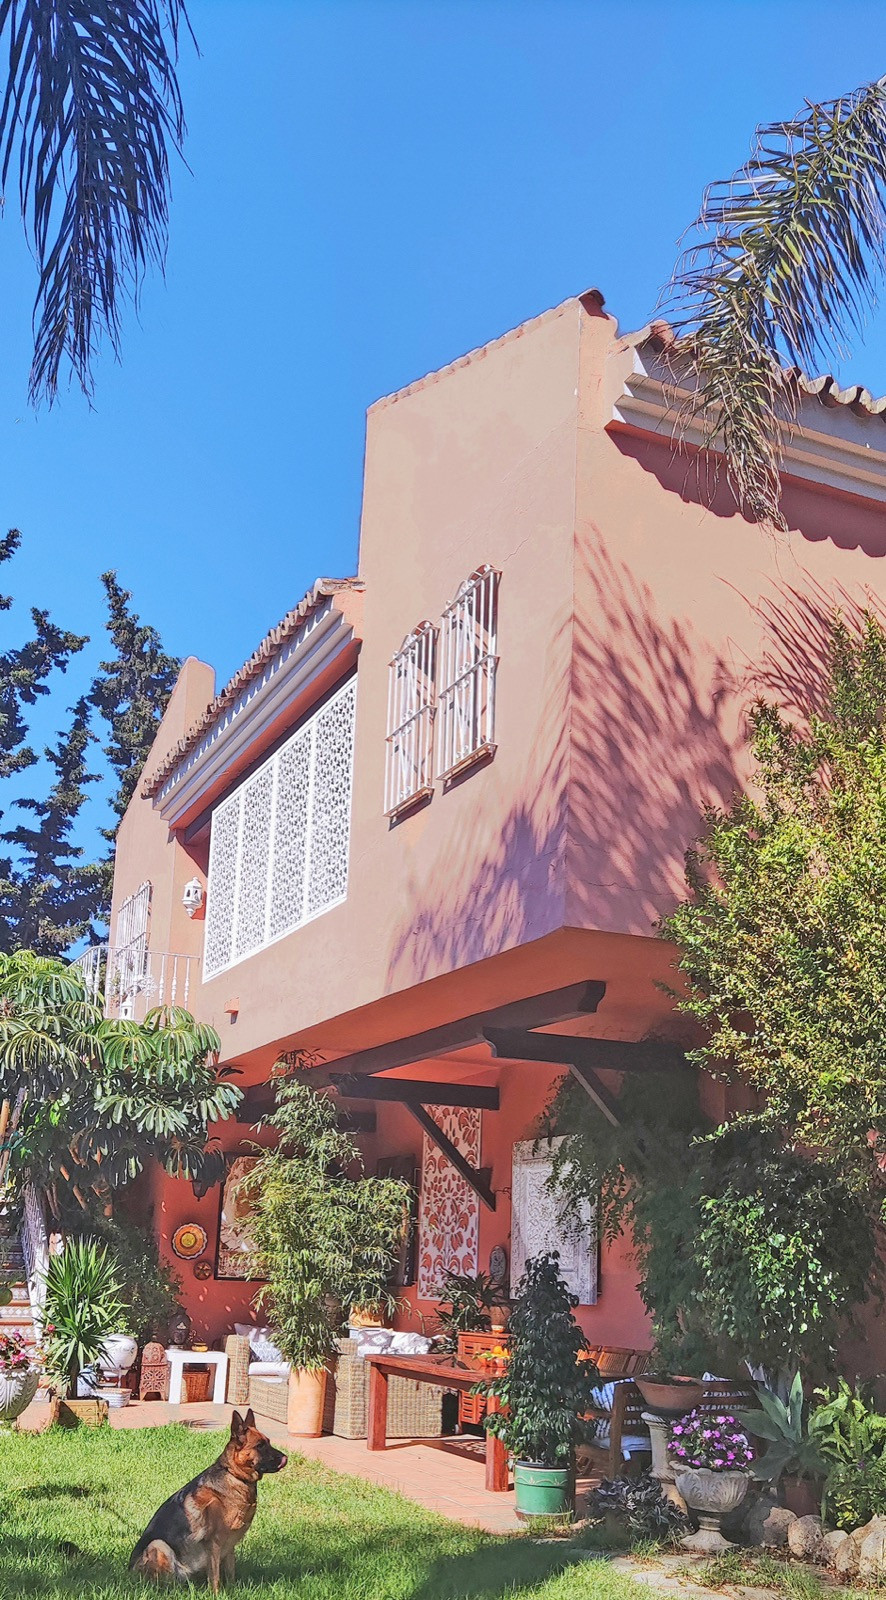 Villa with covered porch with wooden beams, garden with lighting and fruit trees, terraces with splendid views in Paraiso Barronal